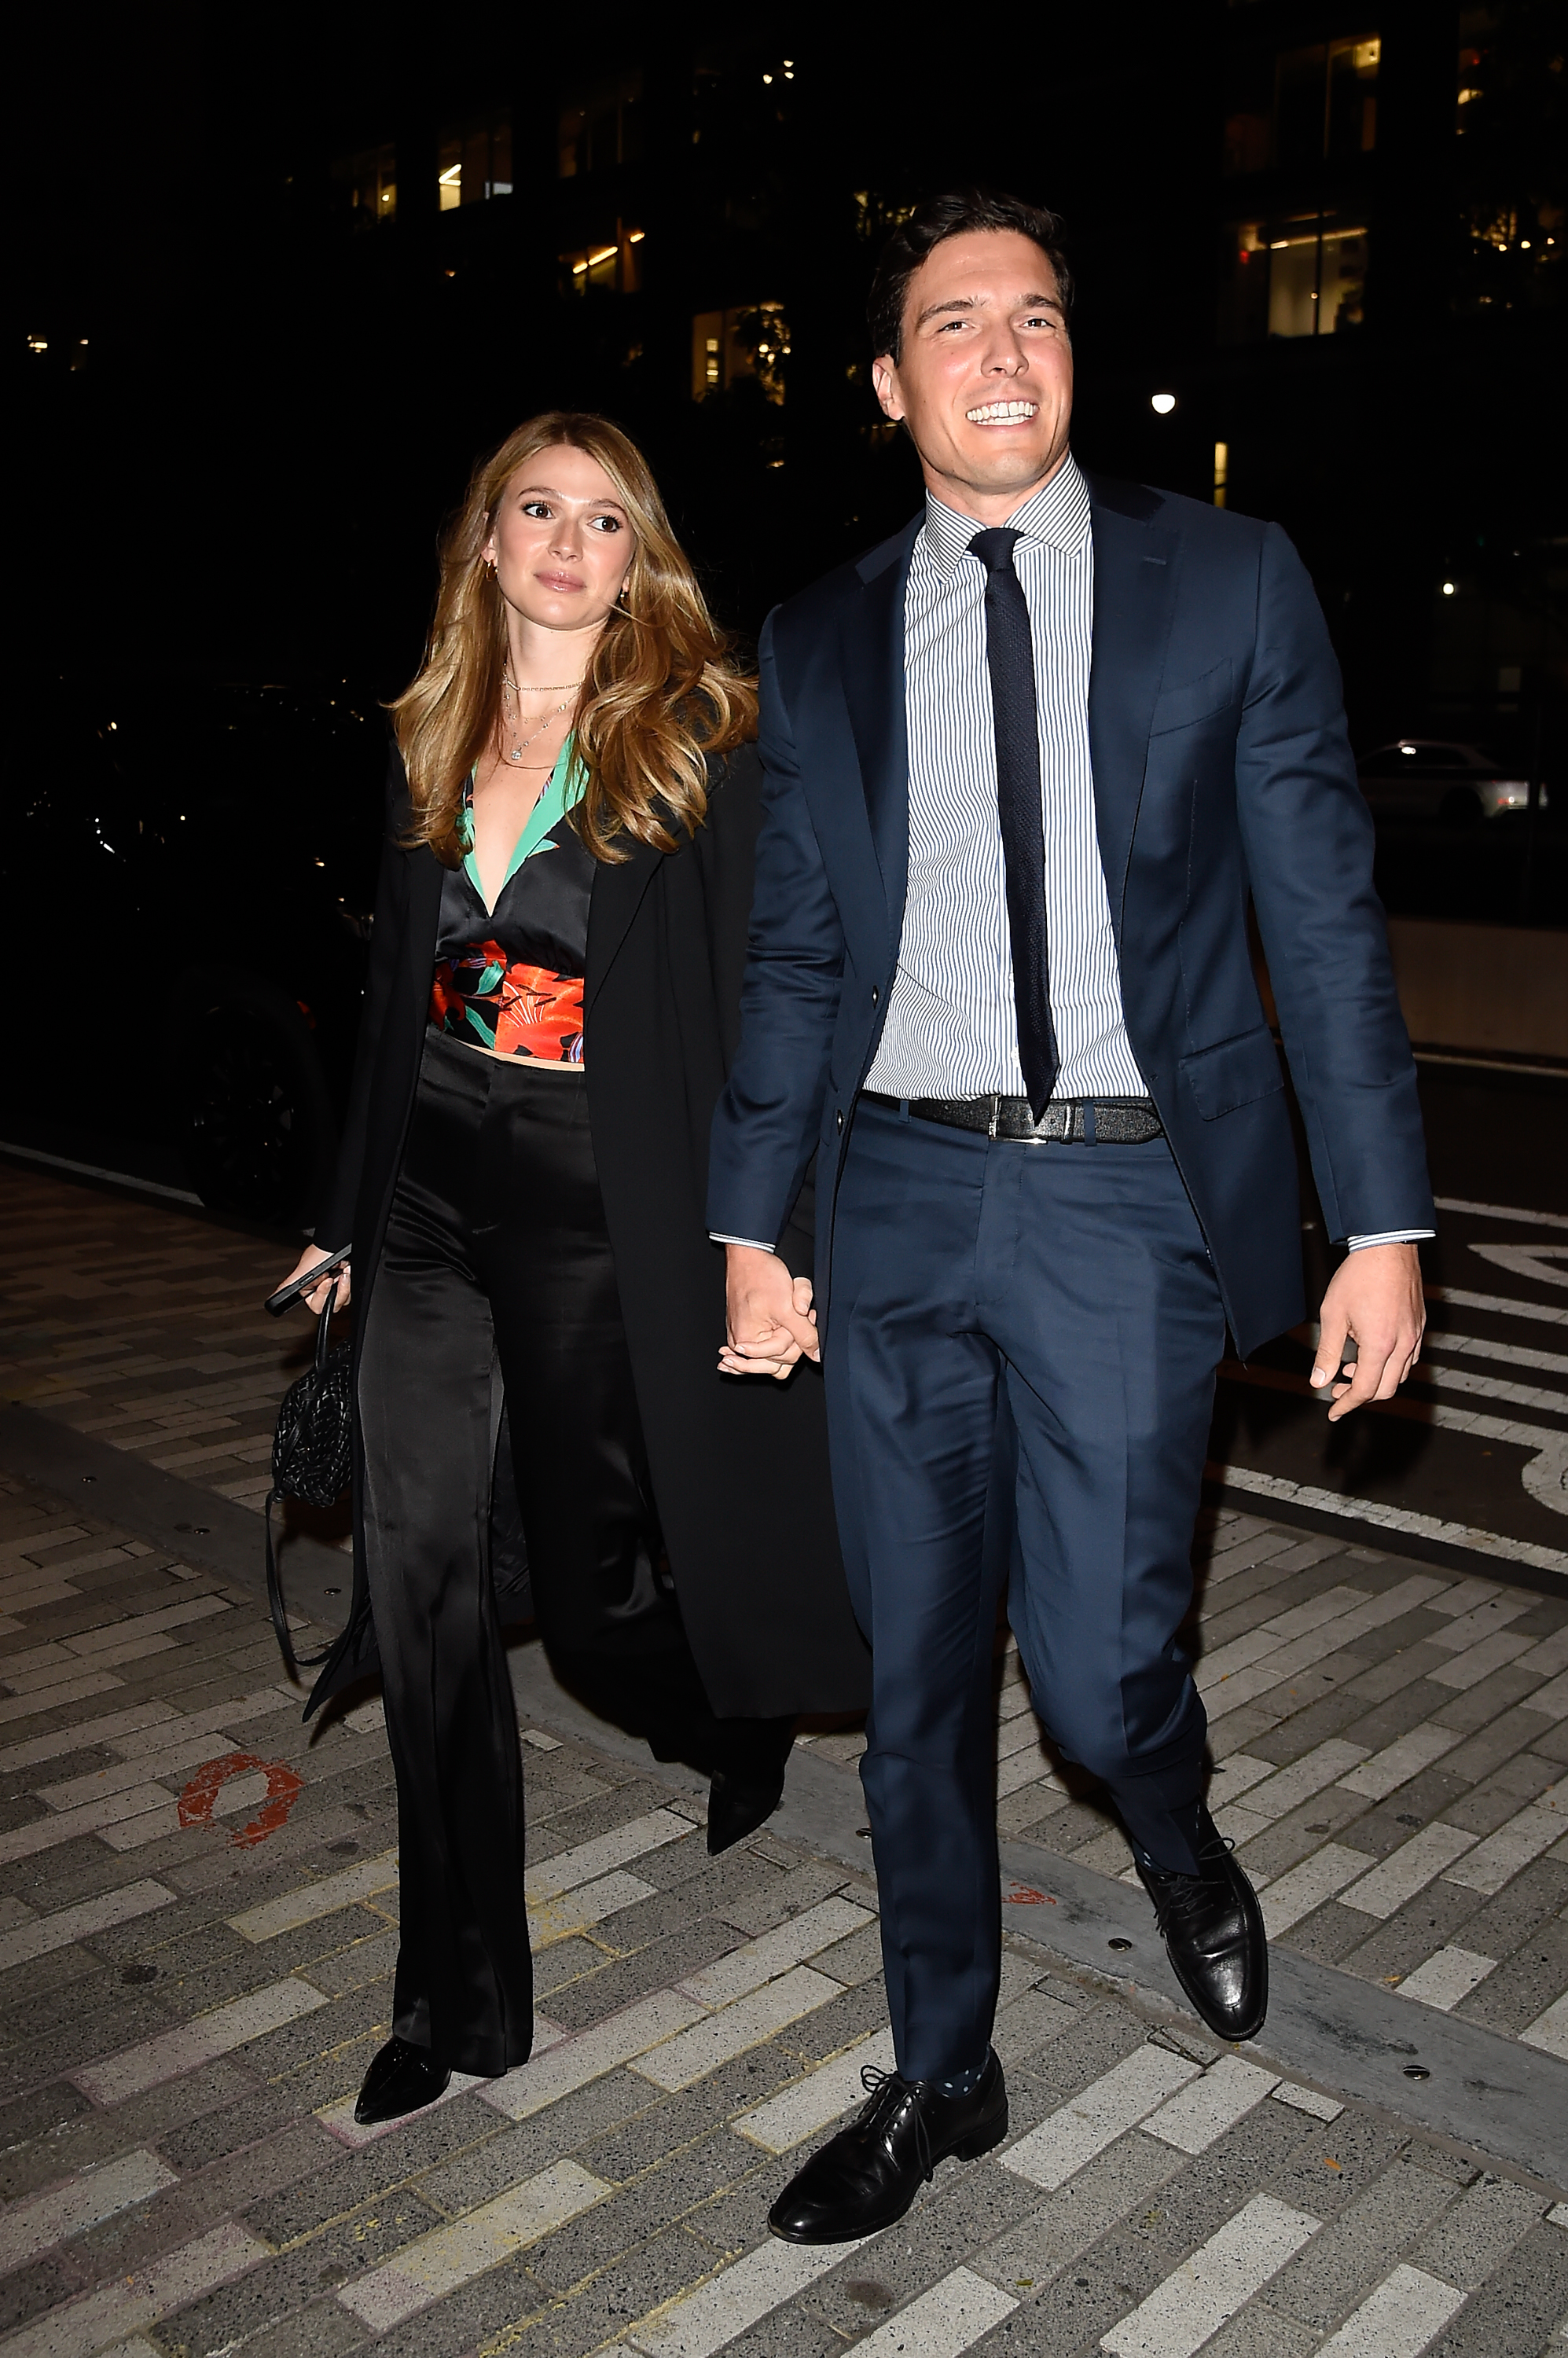 Amanda Dubin and Will Reeve going to the Bring Change to Mind Revels & Revelations event in New York City on October 9, 2023 | Source: Getty Images